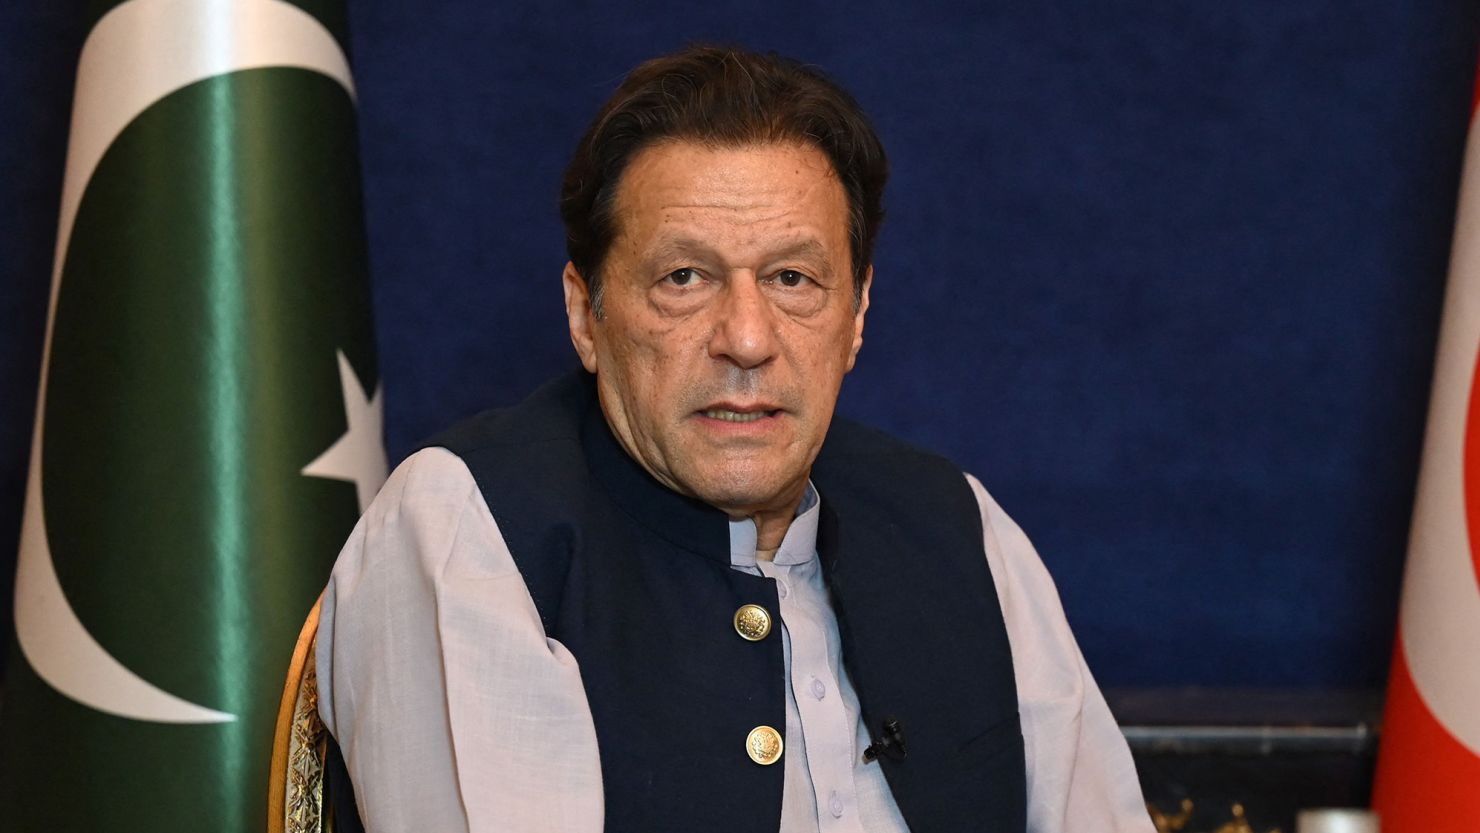 Former Pakistan's prime minister Imran Khan speaks during an interview with AFP at his residence in Lahore on March 15, 2023. - Former Pakistan prime Minister Imran Khan on March 15 said the government wanted him behind bars in order to stop him taking part in elections due later this year. (Photo by Aamir QURESHI / AFP) (Photo by AAMIR QURESHI/AFP via Getty Images)